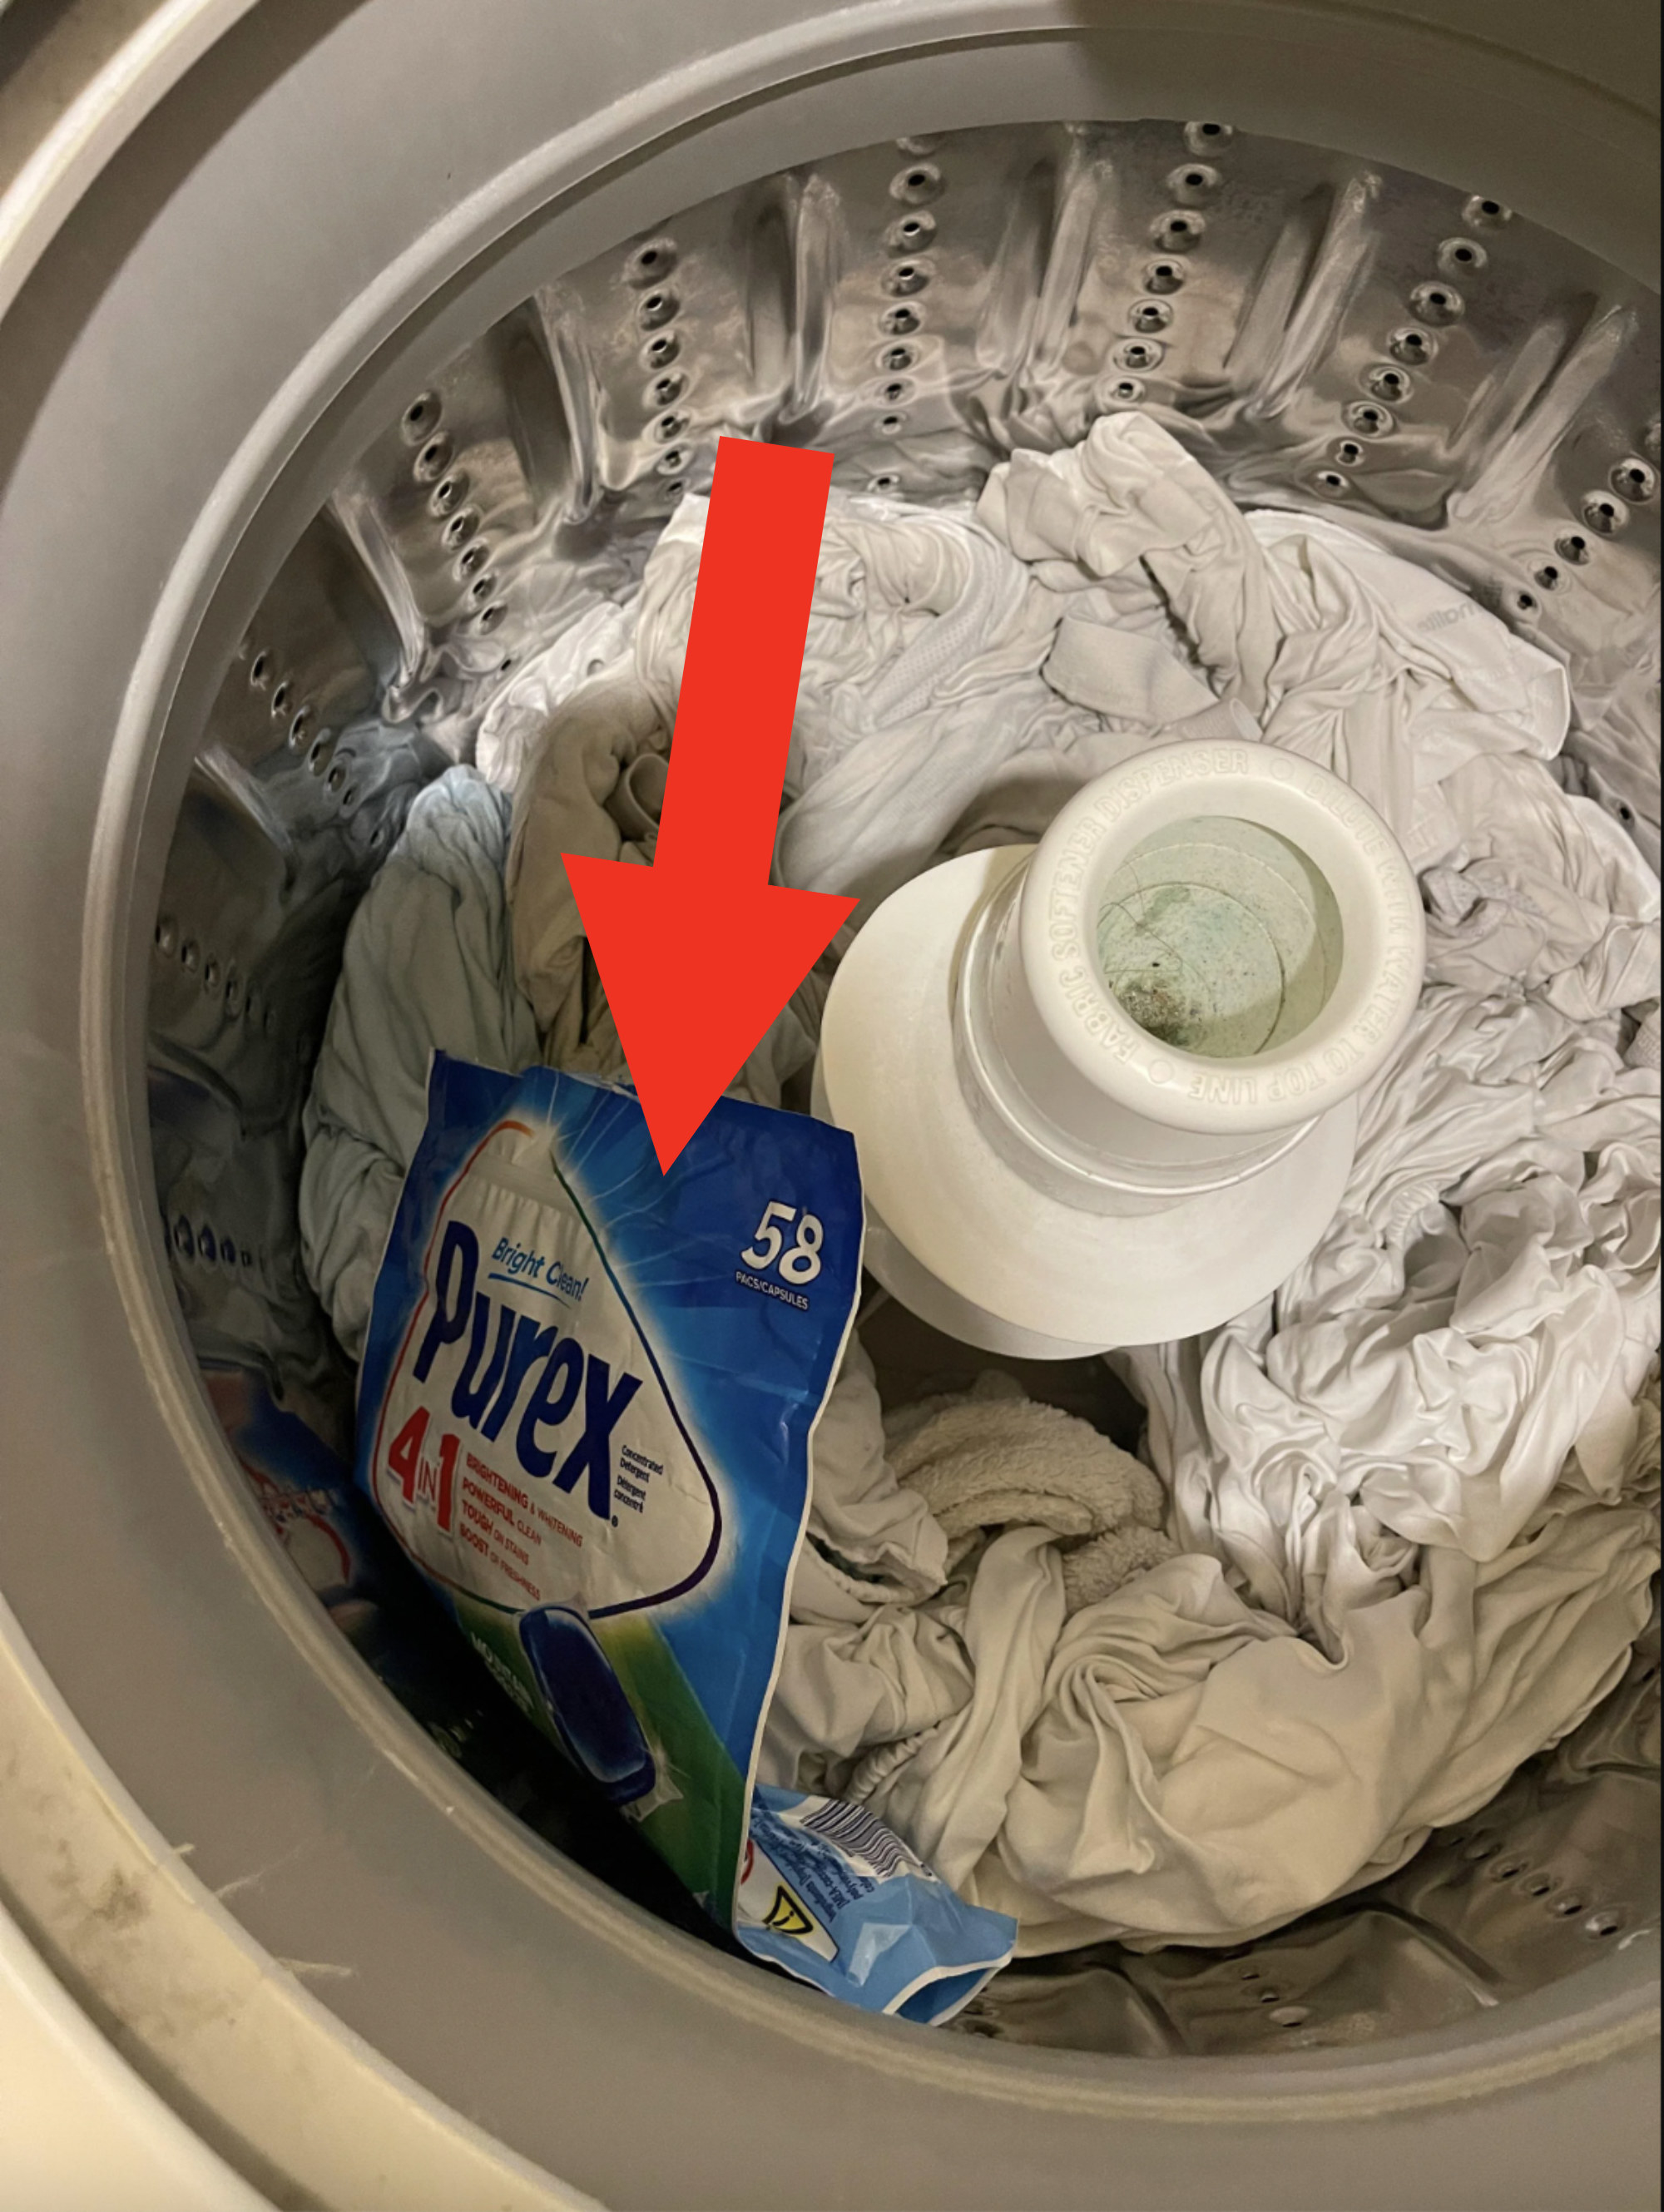 a purex bag in the washer